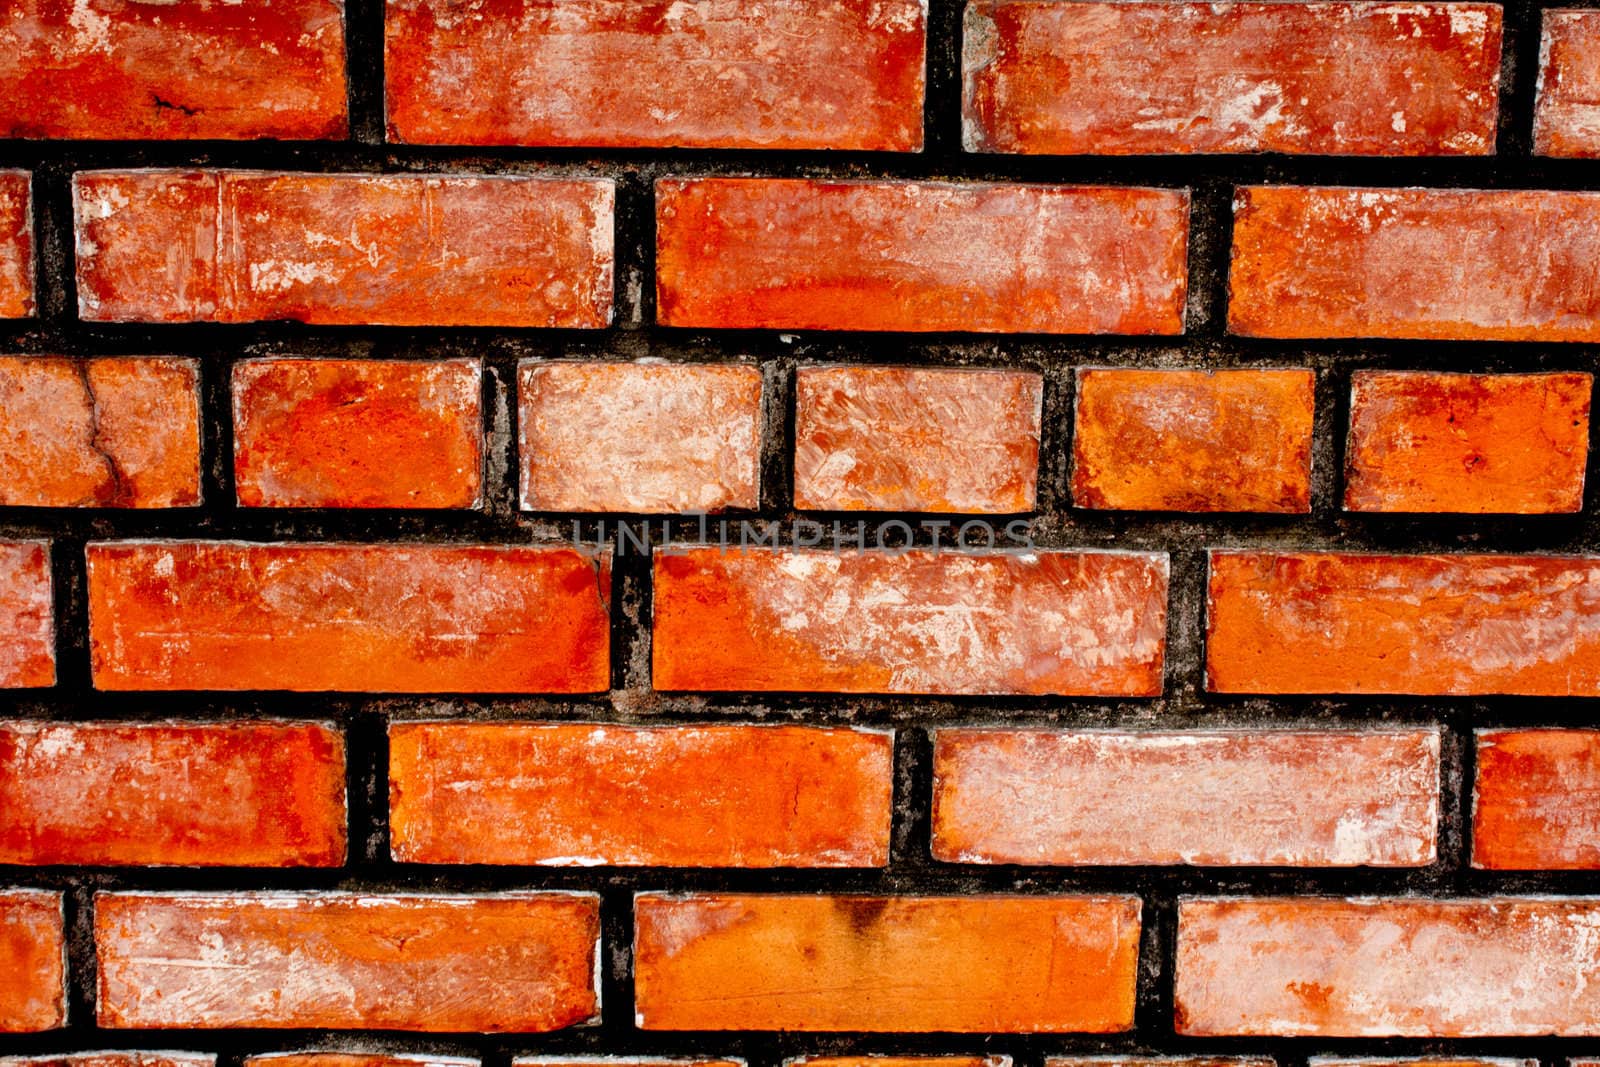 Red brick stack in a row with the rules.